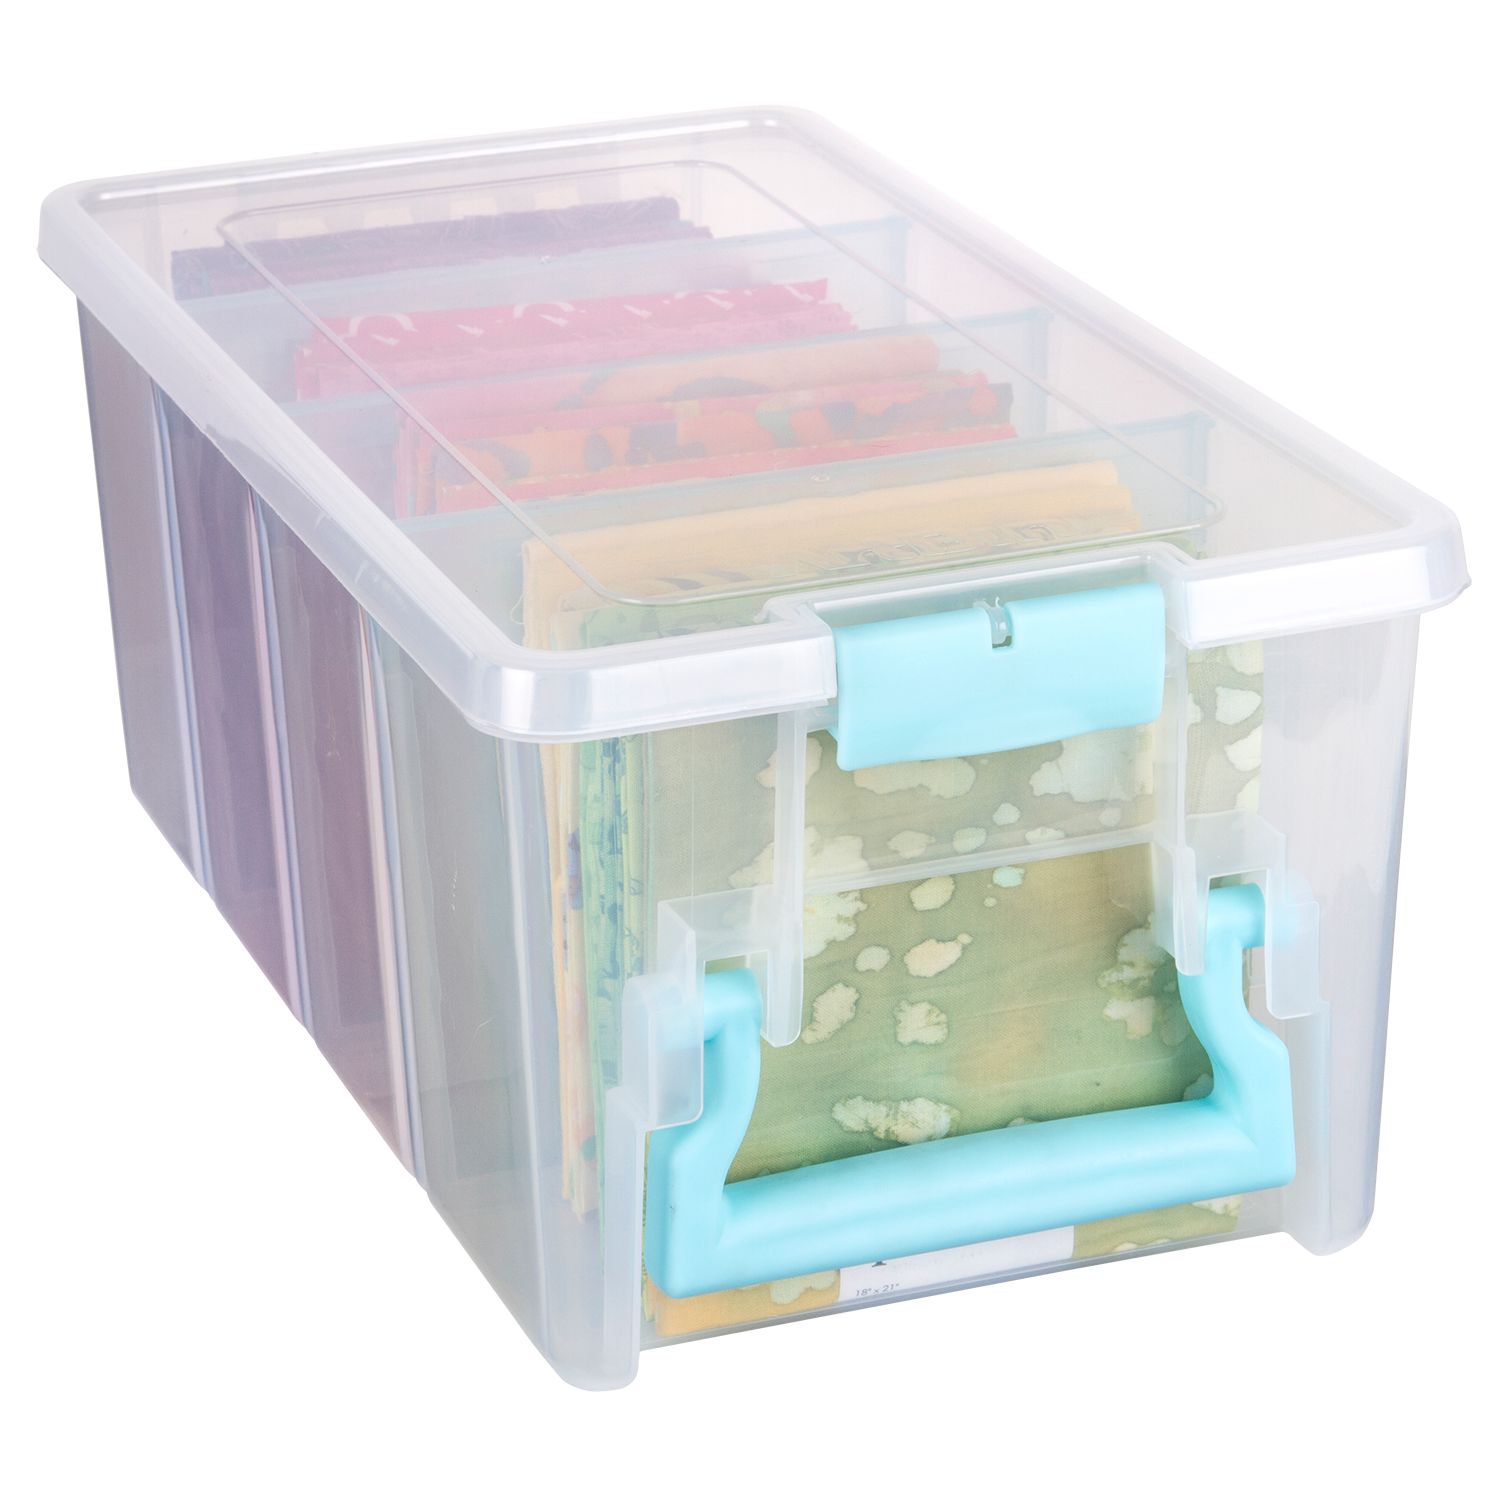 Plastic Storage Case Clear with Aqua Accents 1 ArtBin Semi Satchel with Removable Dividers Portable Art & Craft Organizer with Handle, 